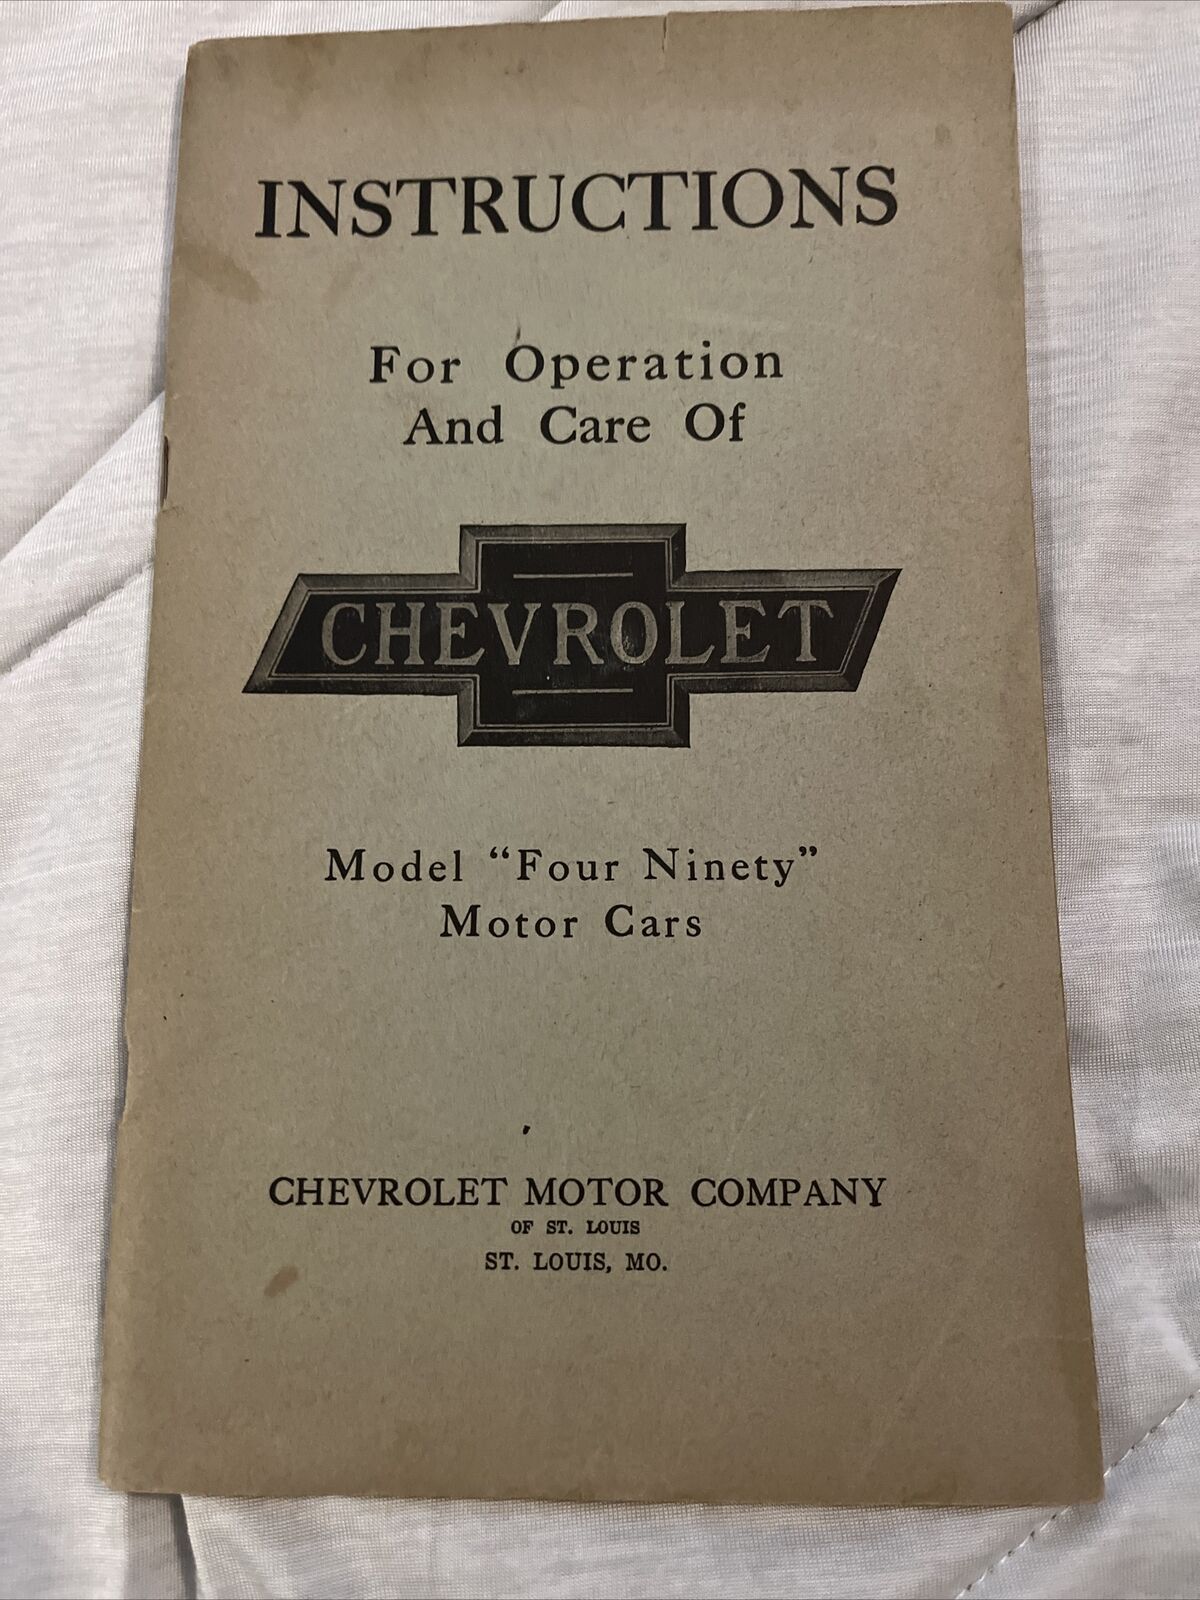 1925 Chevrolet Motor Cars Owners Manual Instructions Model Four Ninety Motor Car